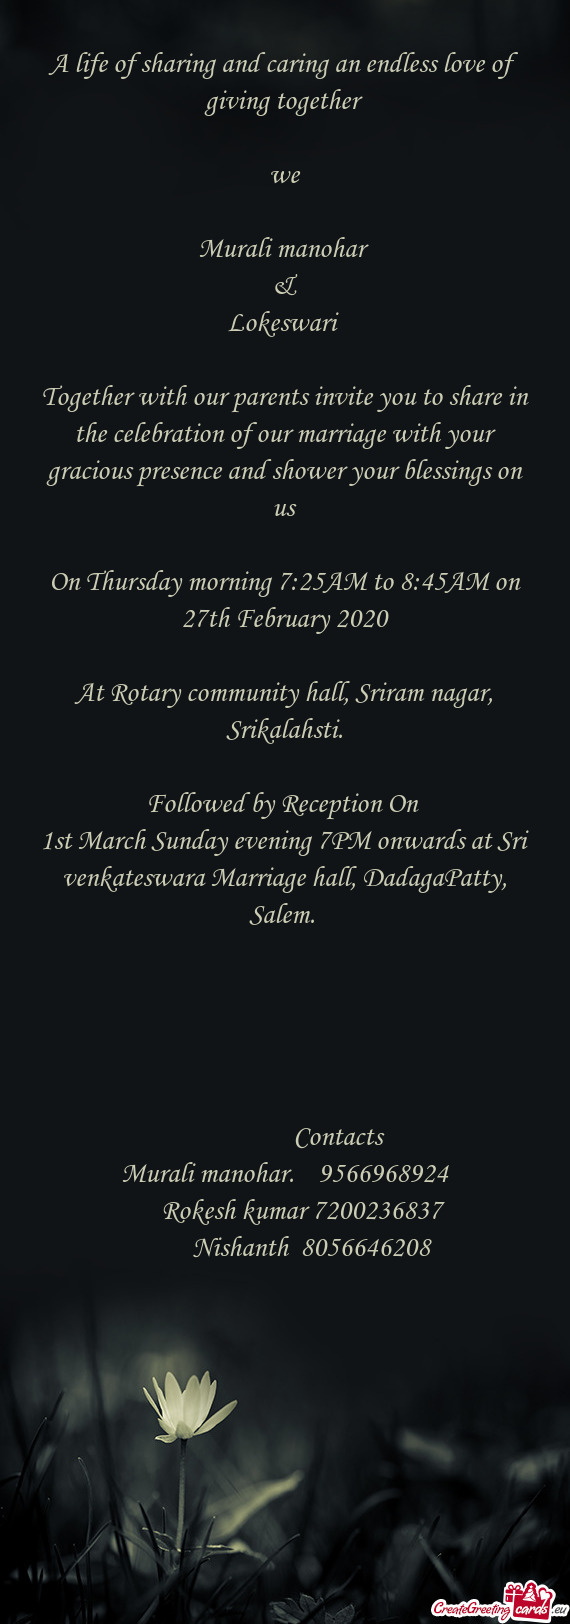 On Thursday morning 7:25AM to 8:45AM on 27th February 2020